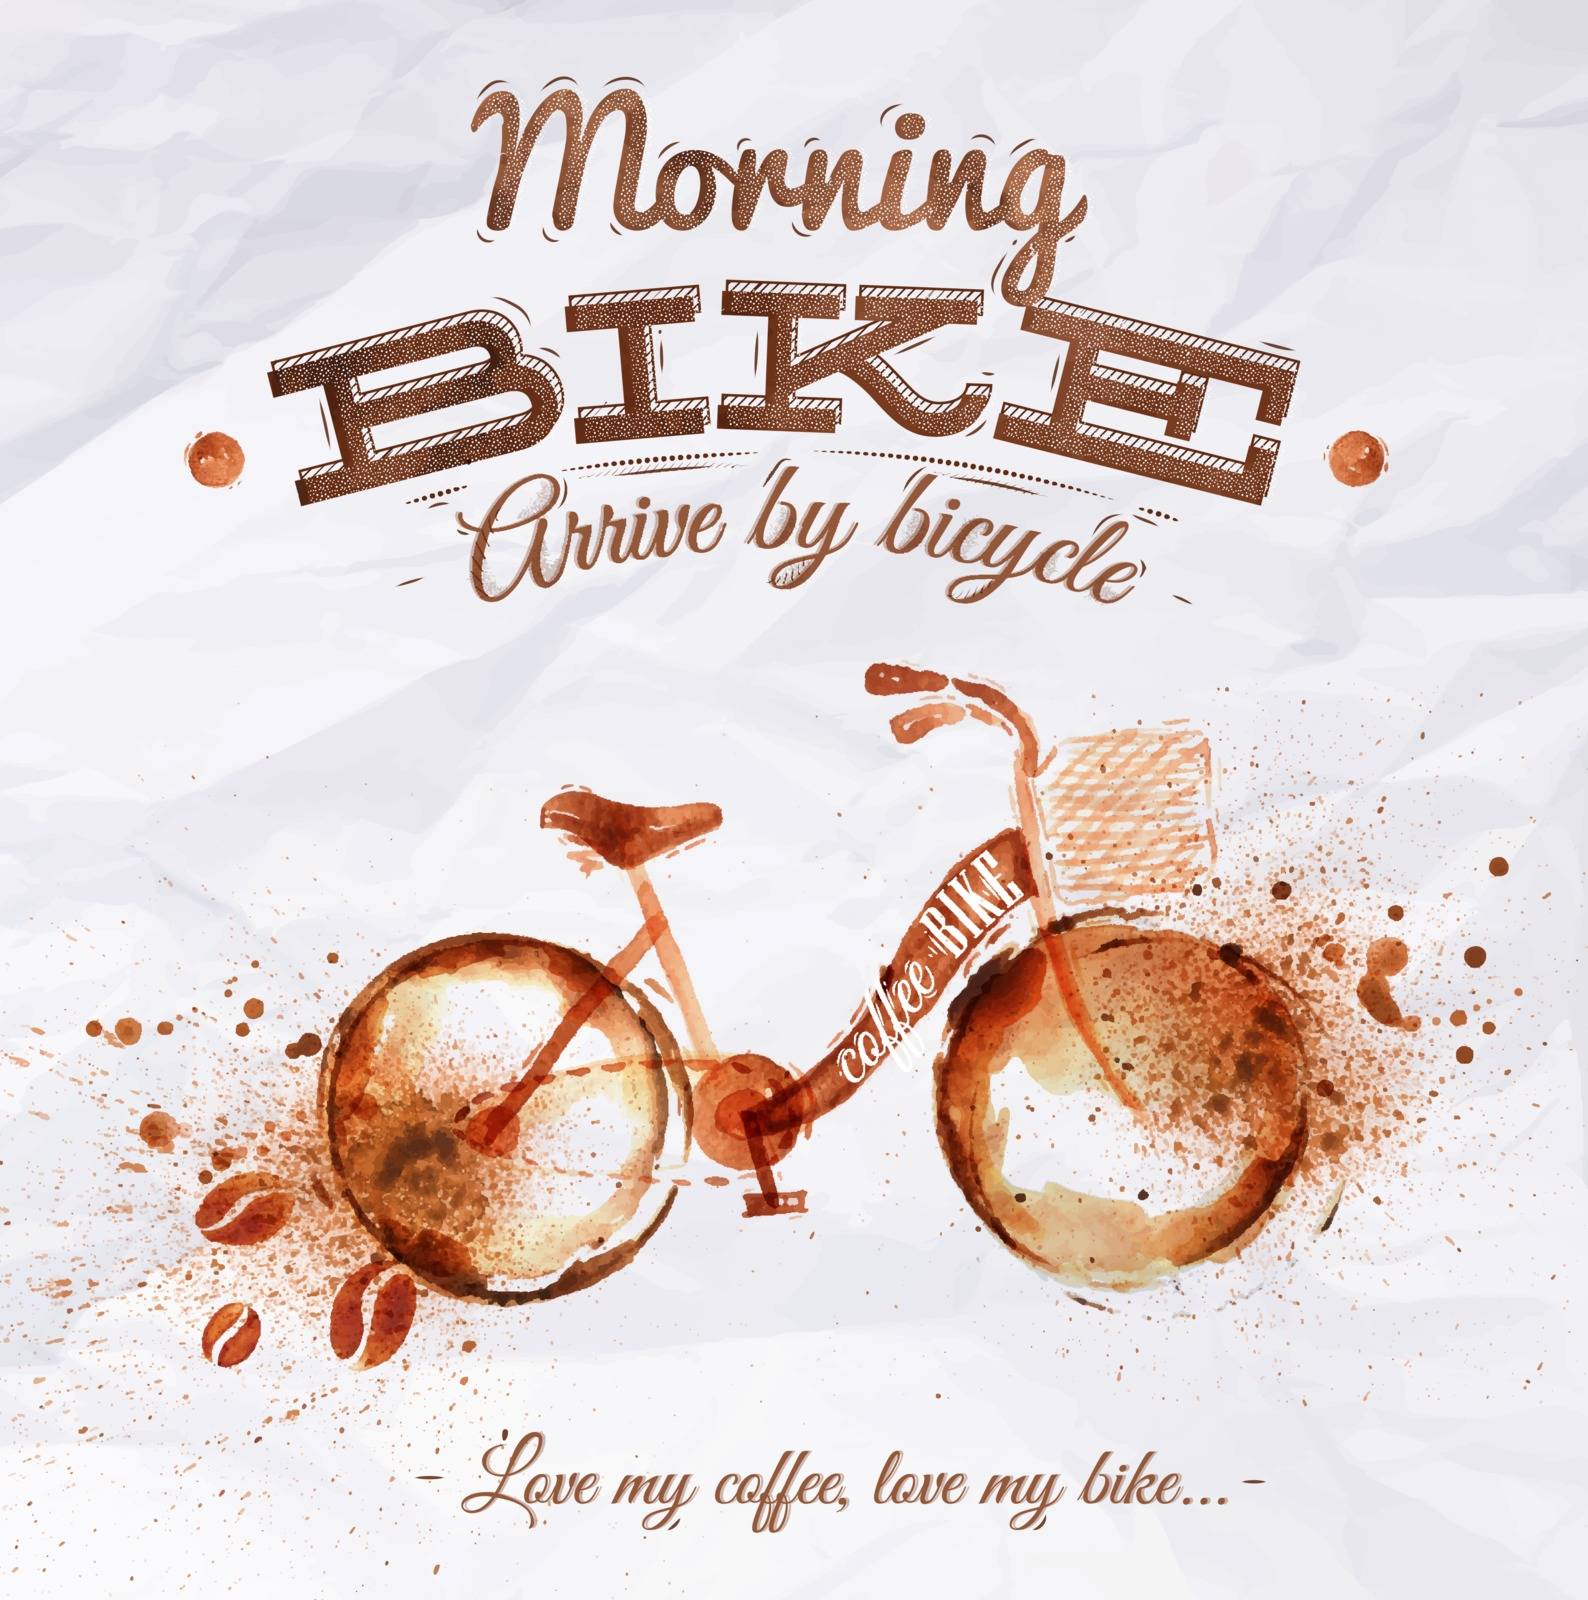 Poster coffee spot bike with lettering Morning bike arrive by bicycle Love my coffee, love my bike